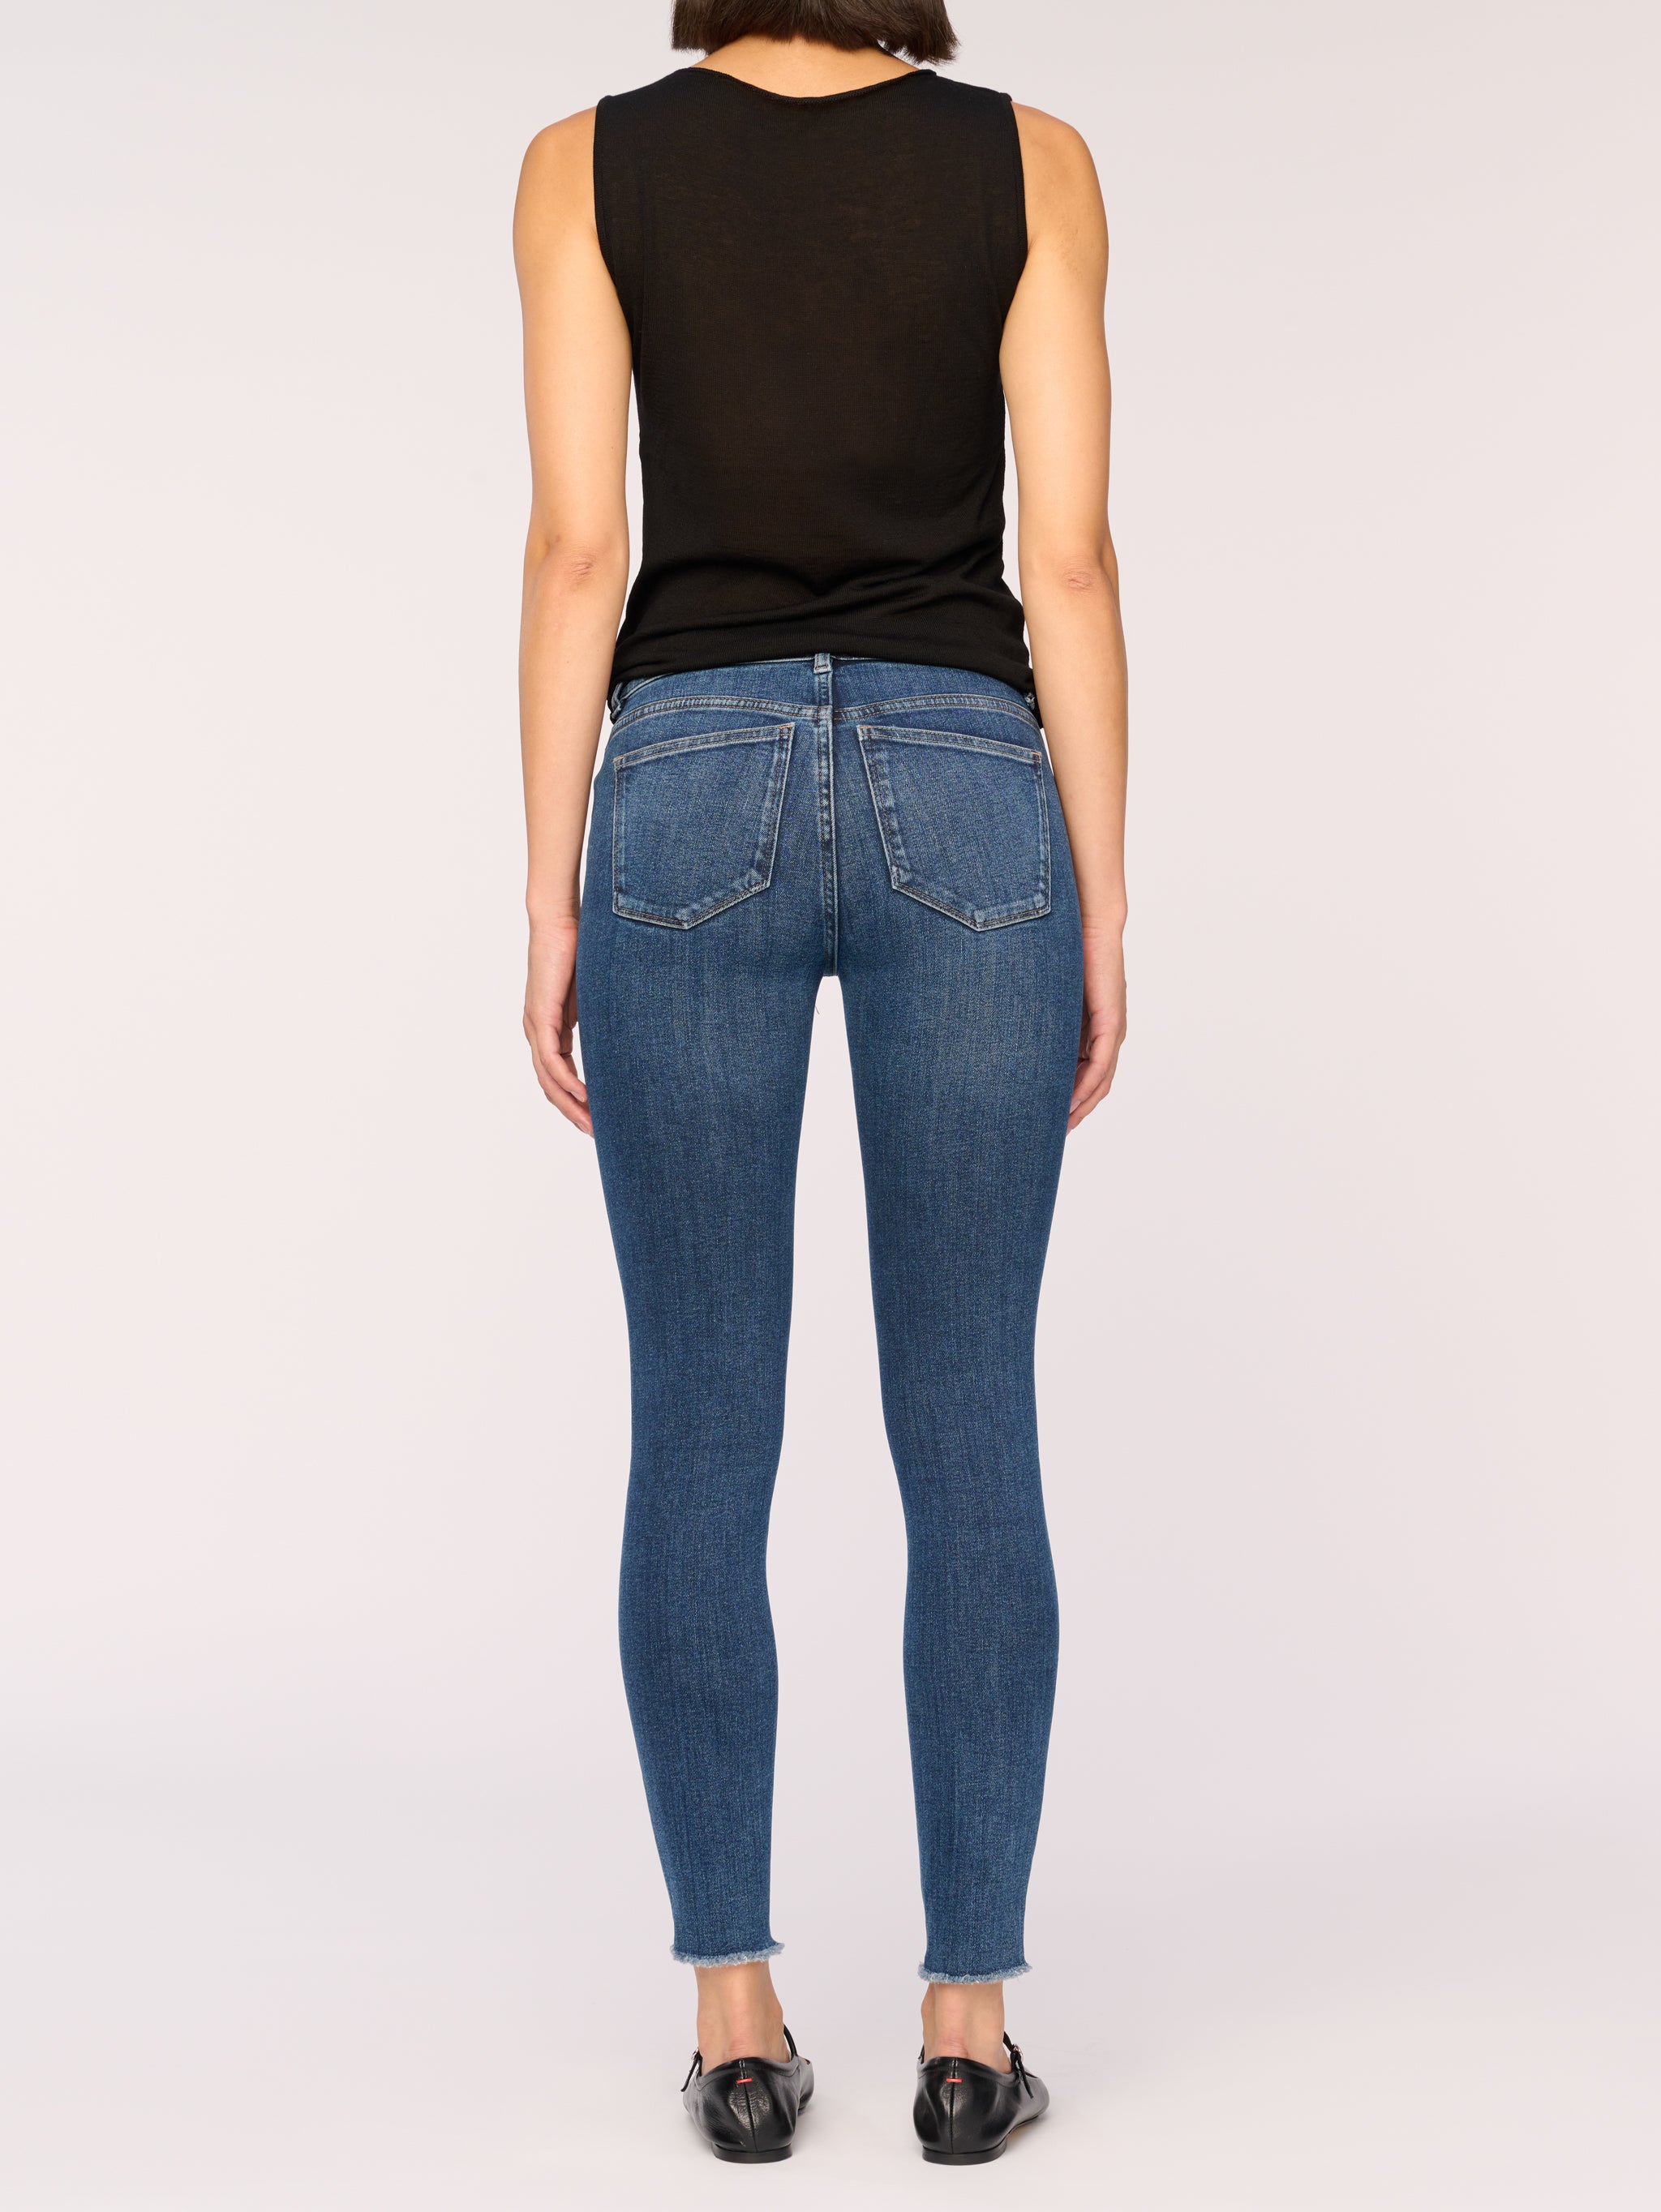 DL1961 Florence Ankle Skinny Jeans in Canyon Rose